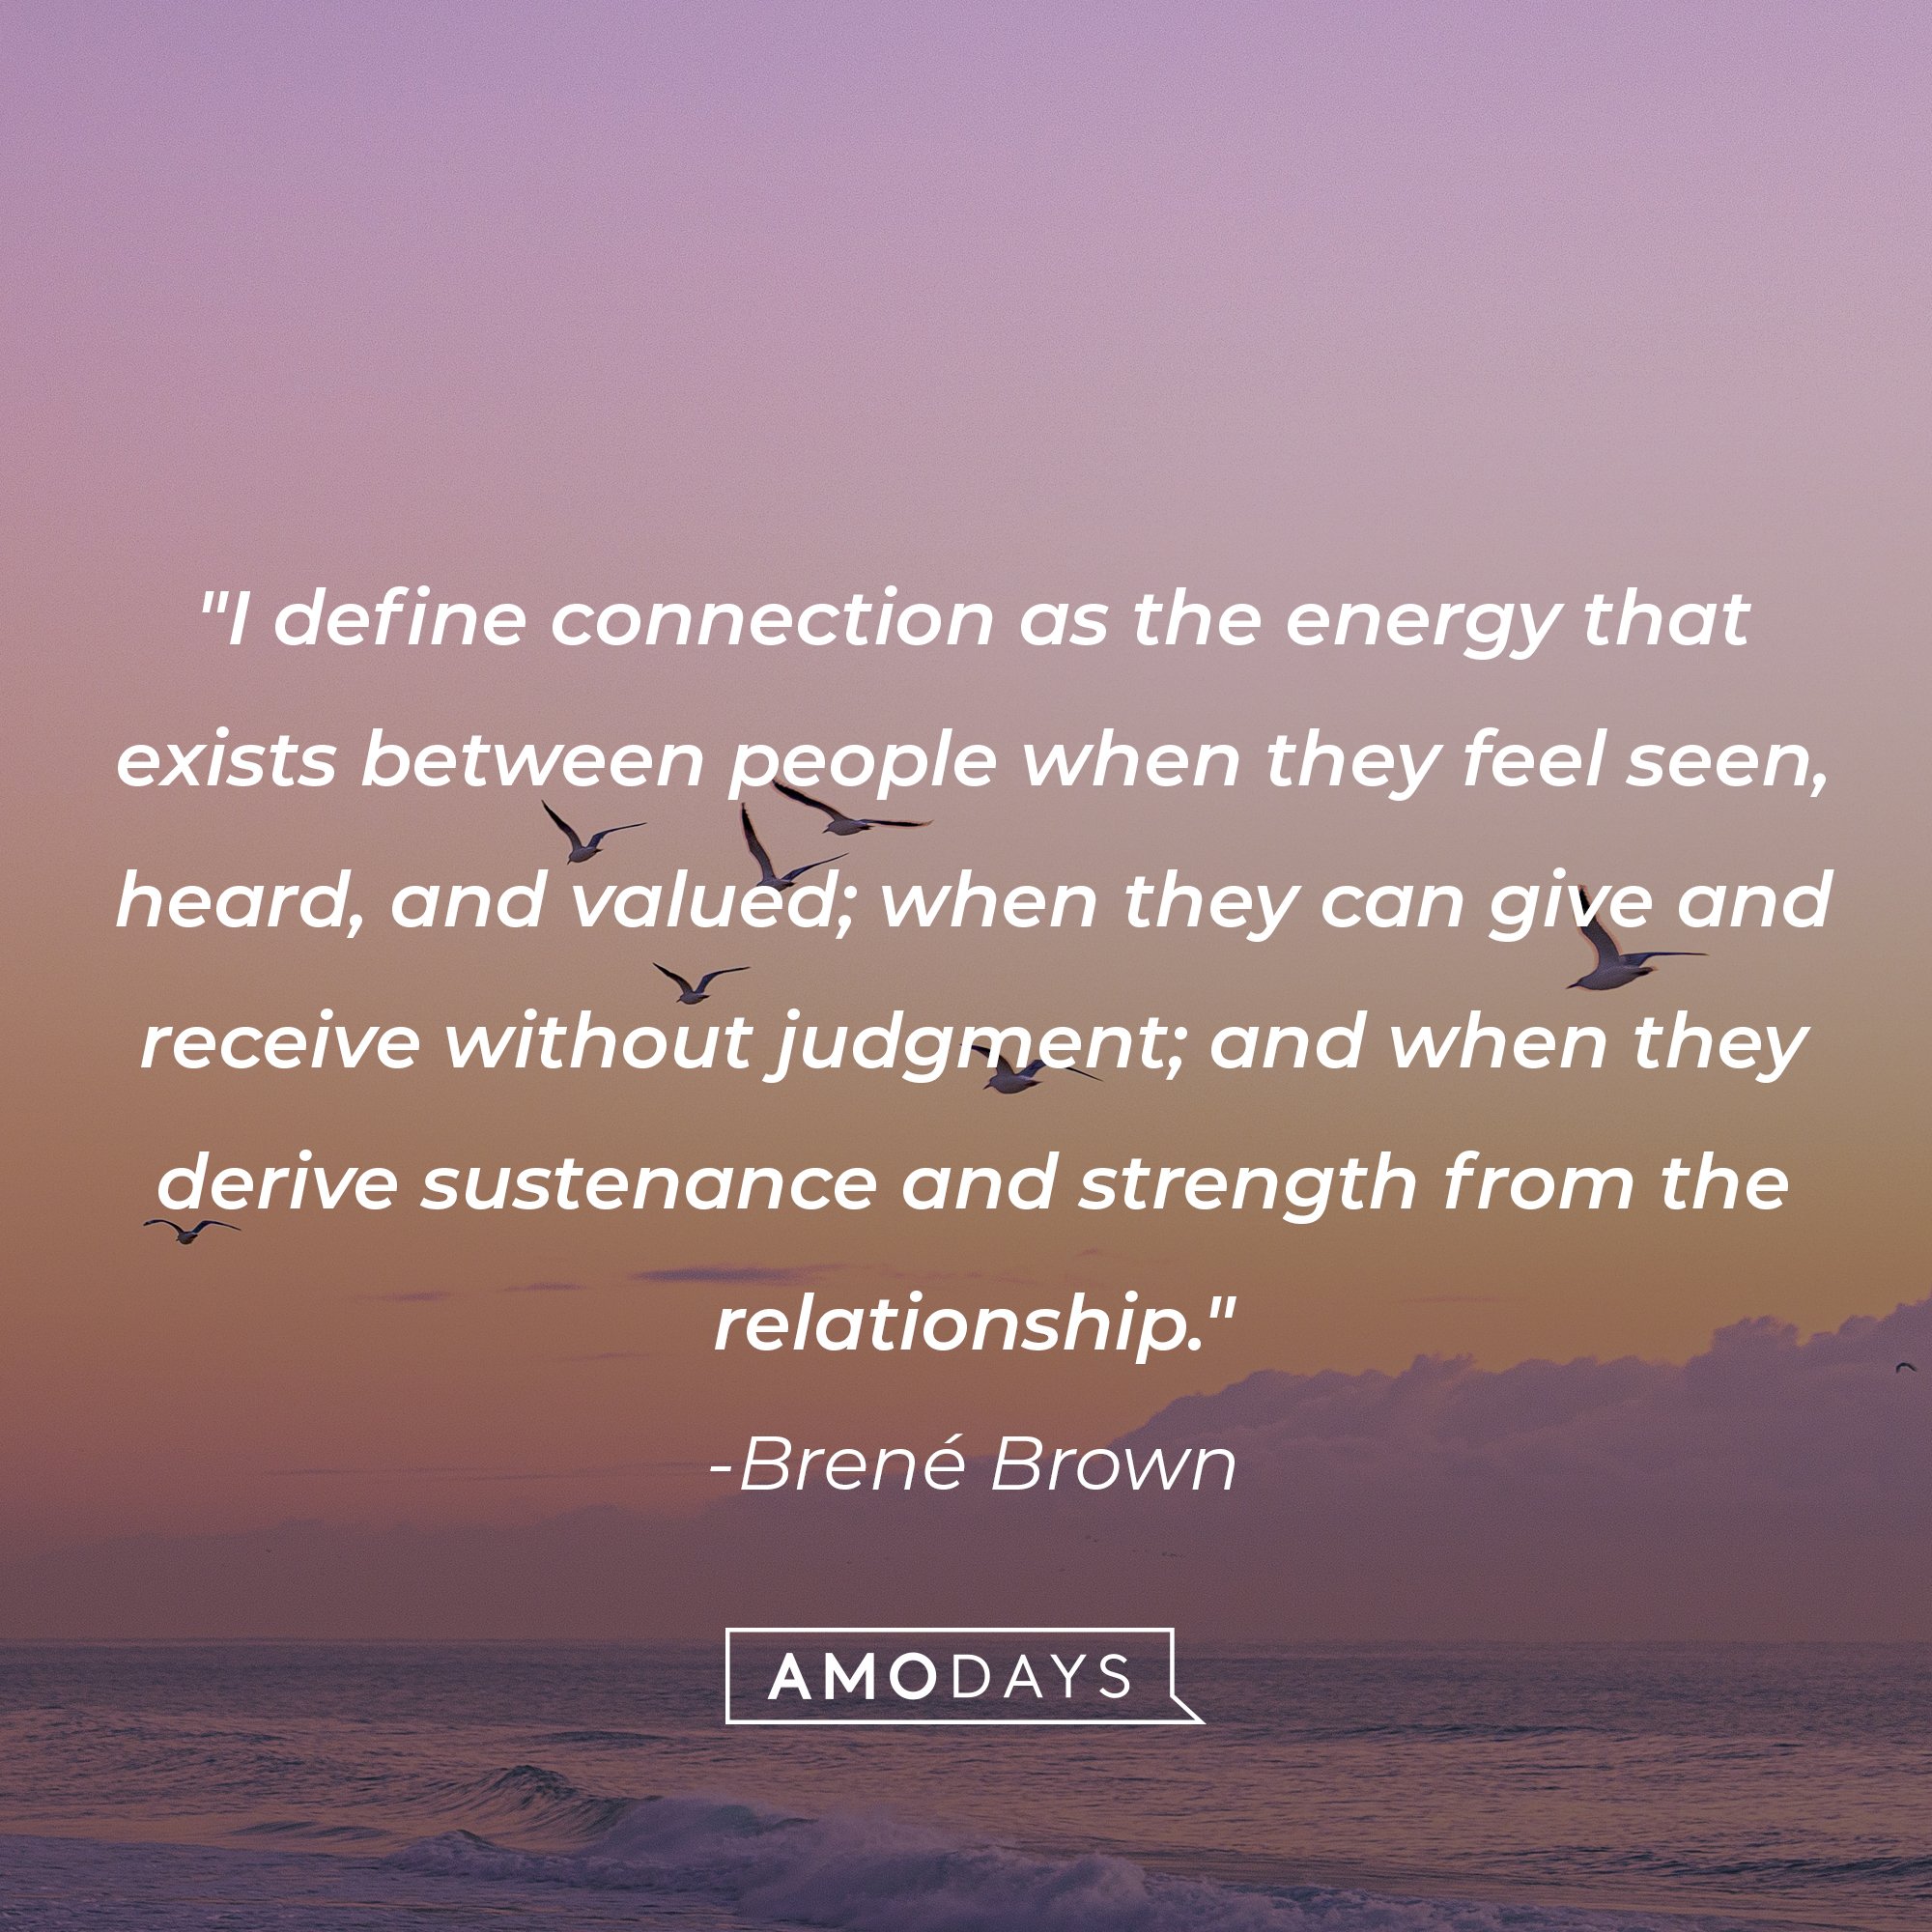 Brené Brown’s quote: "I define connection as the energy that exists between people when they feel seen, heard, and valued; when they can give and receive without judgment; and when they derive sustenance and strength from the relationship." | Image: AmoDays 